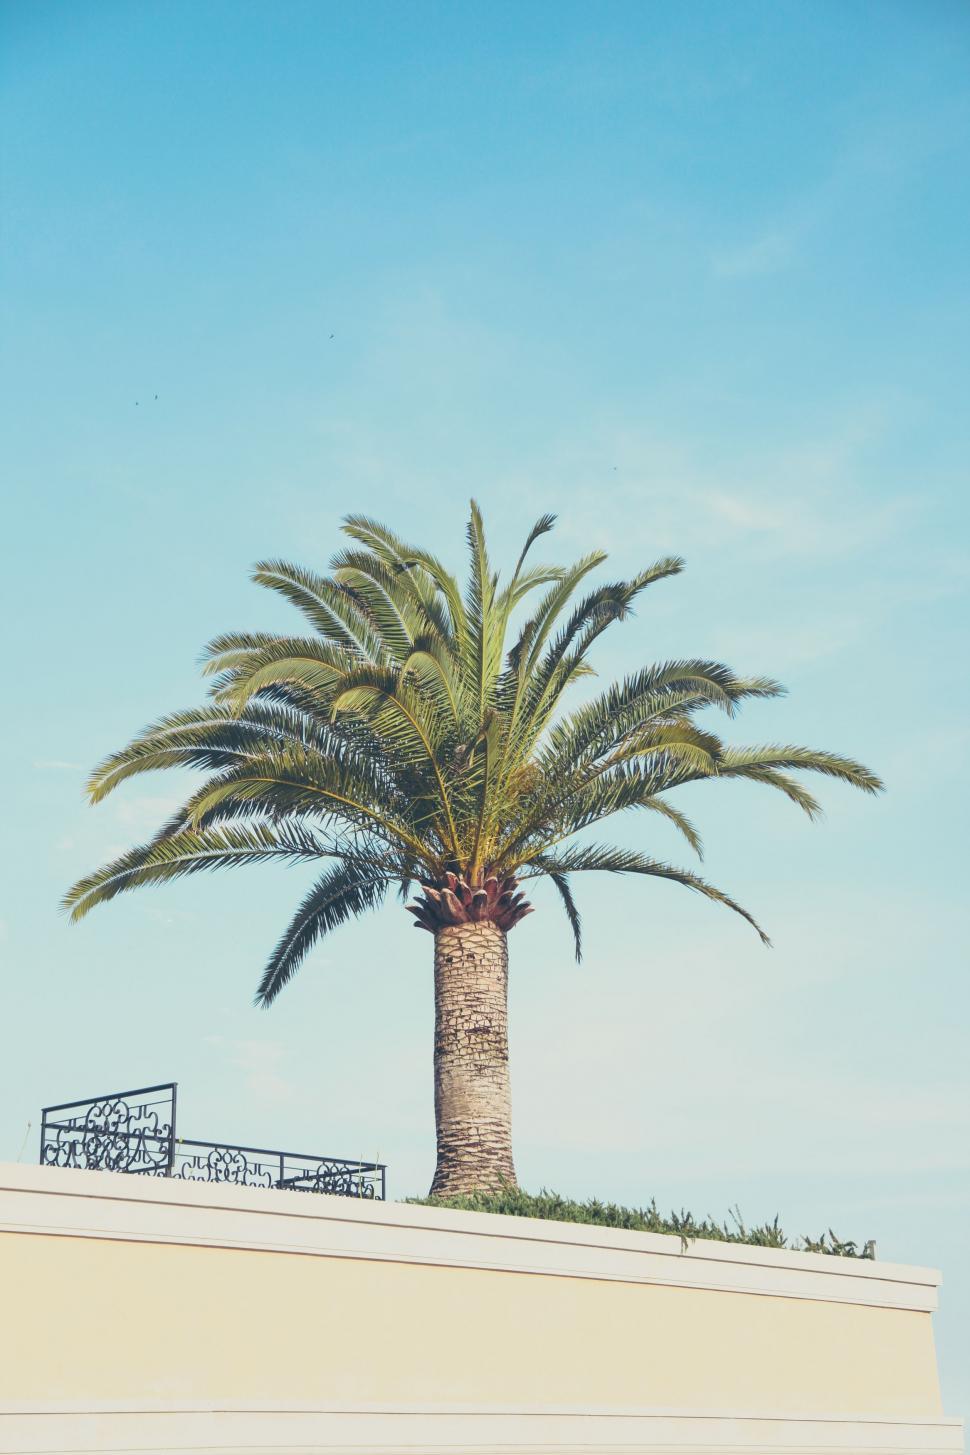 Free Image of Palm Tree on Top of a Building 